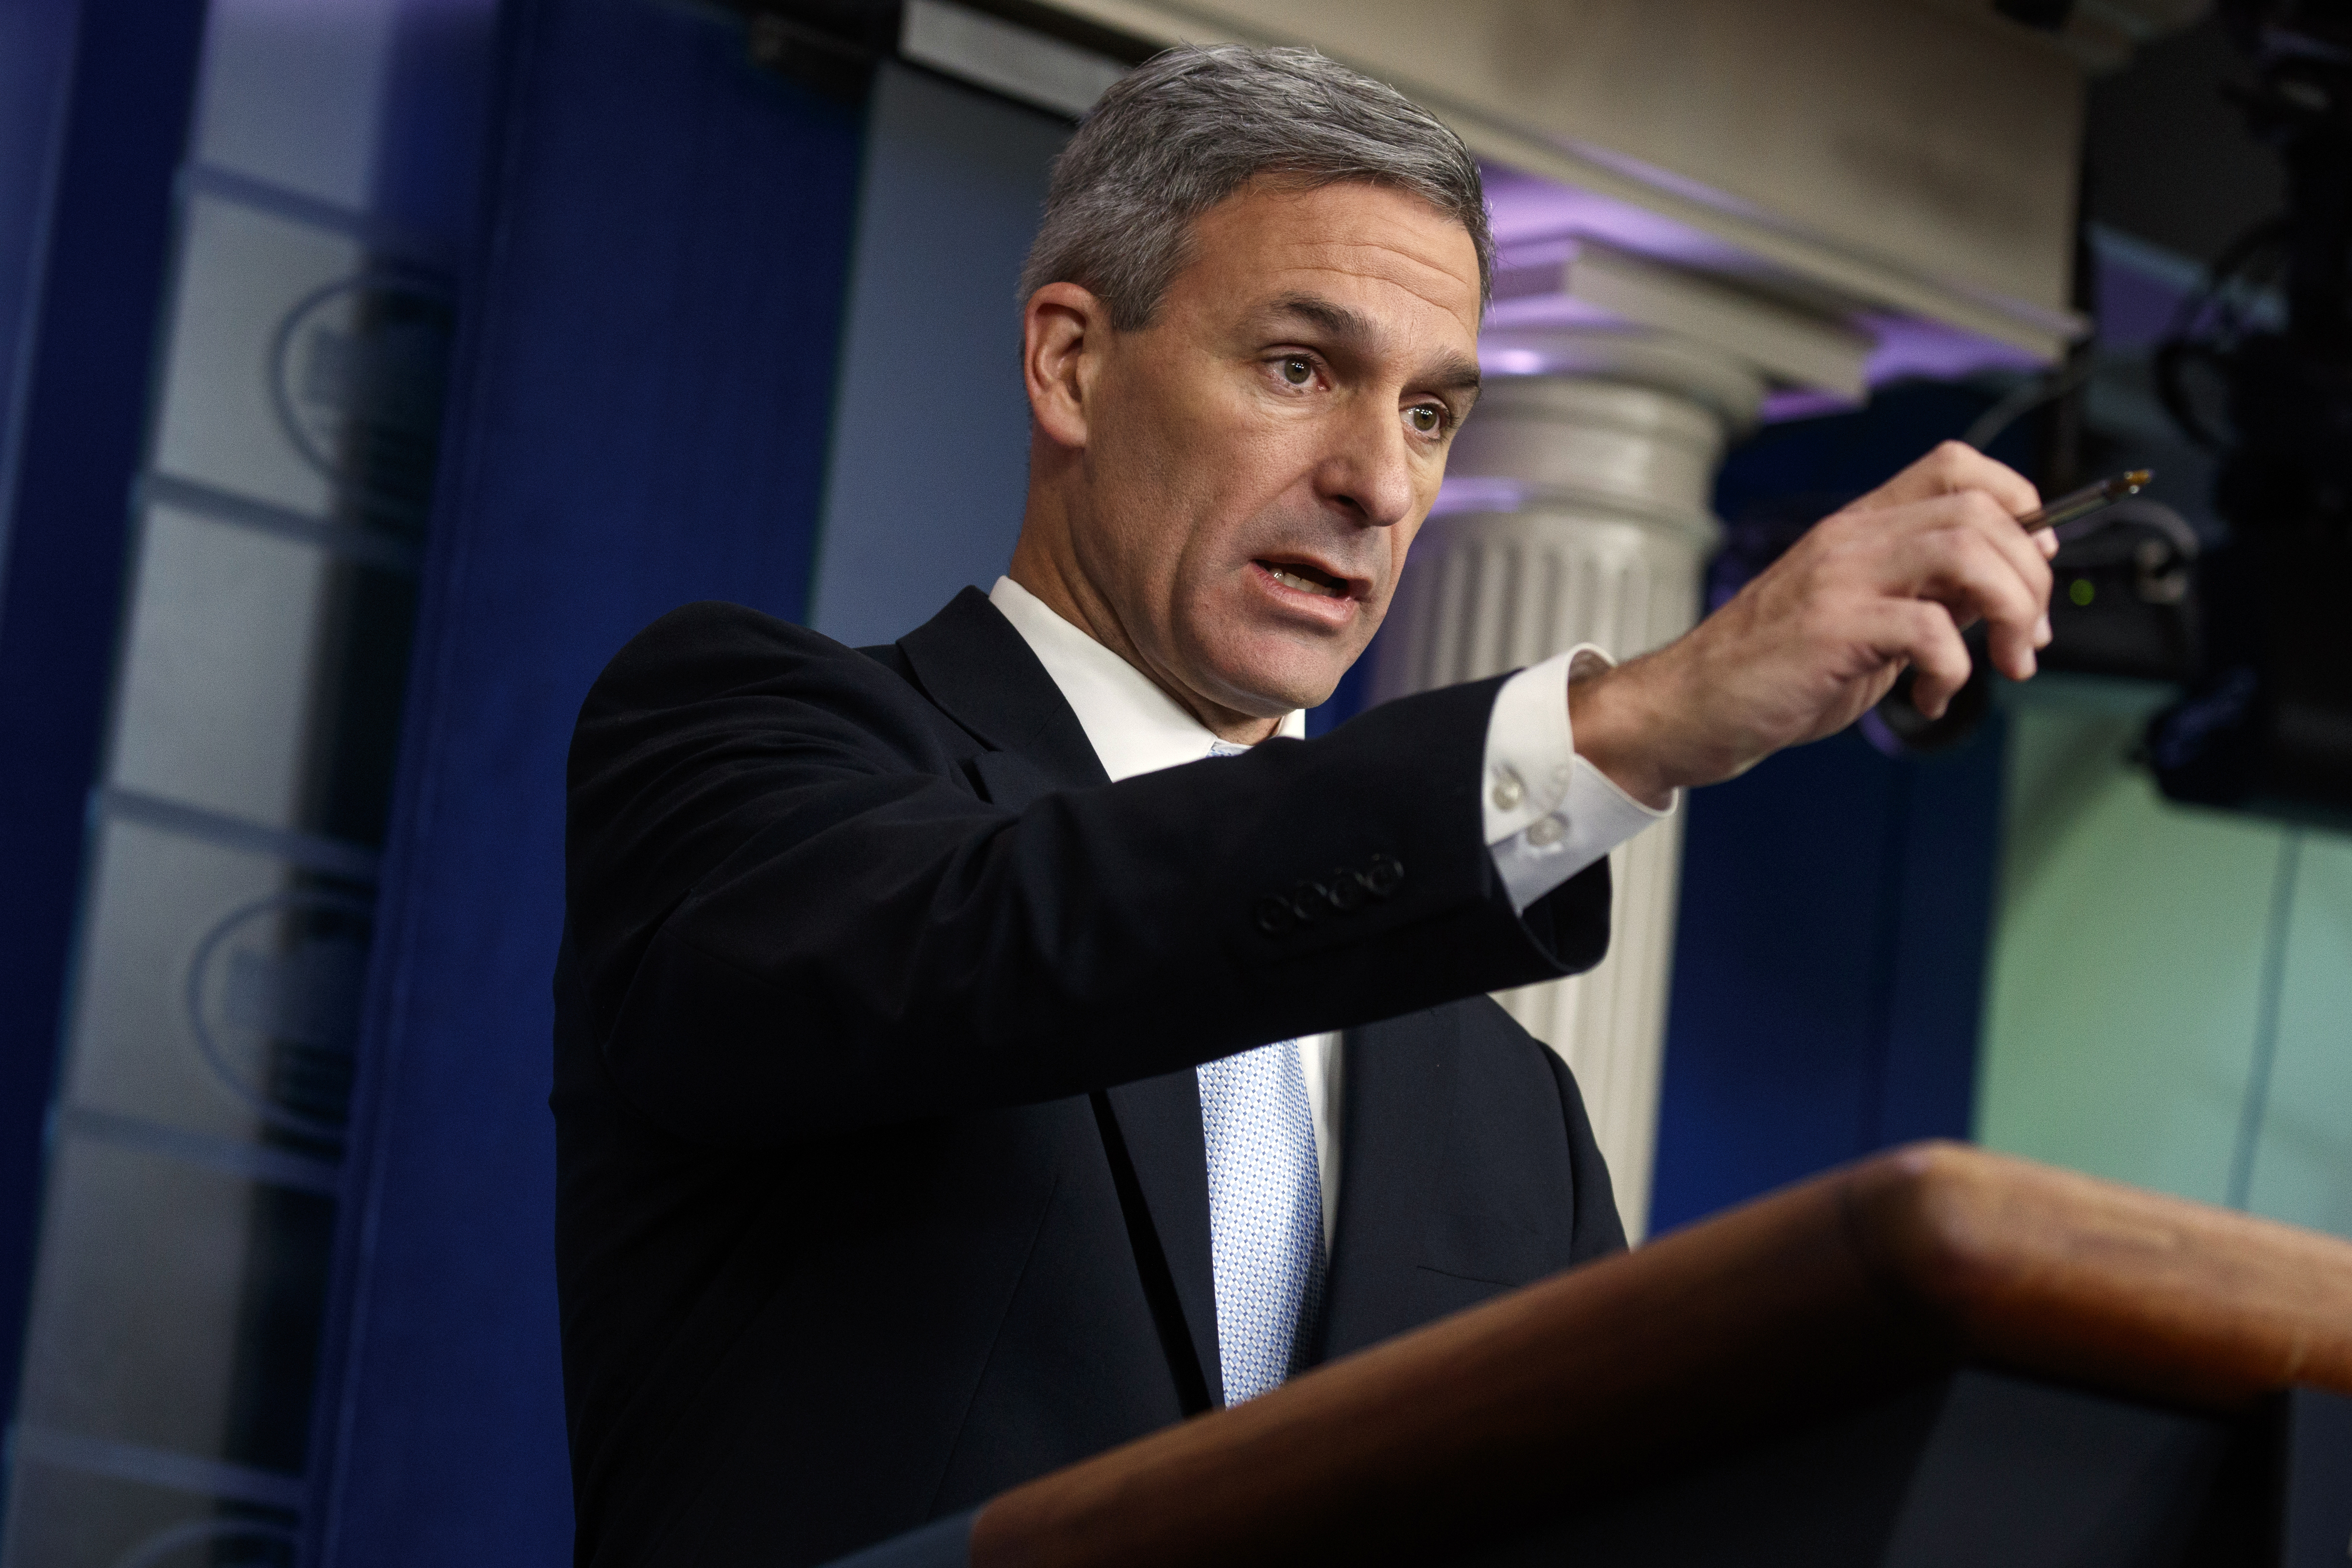 Acting Director of United States Citizenship and Immigration Services Ken Cuccinelli